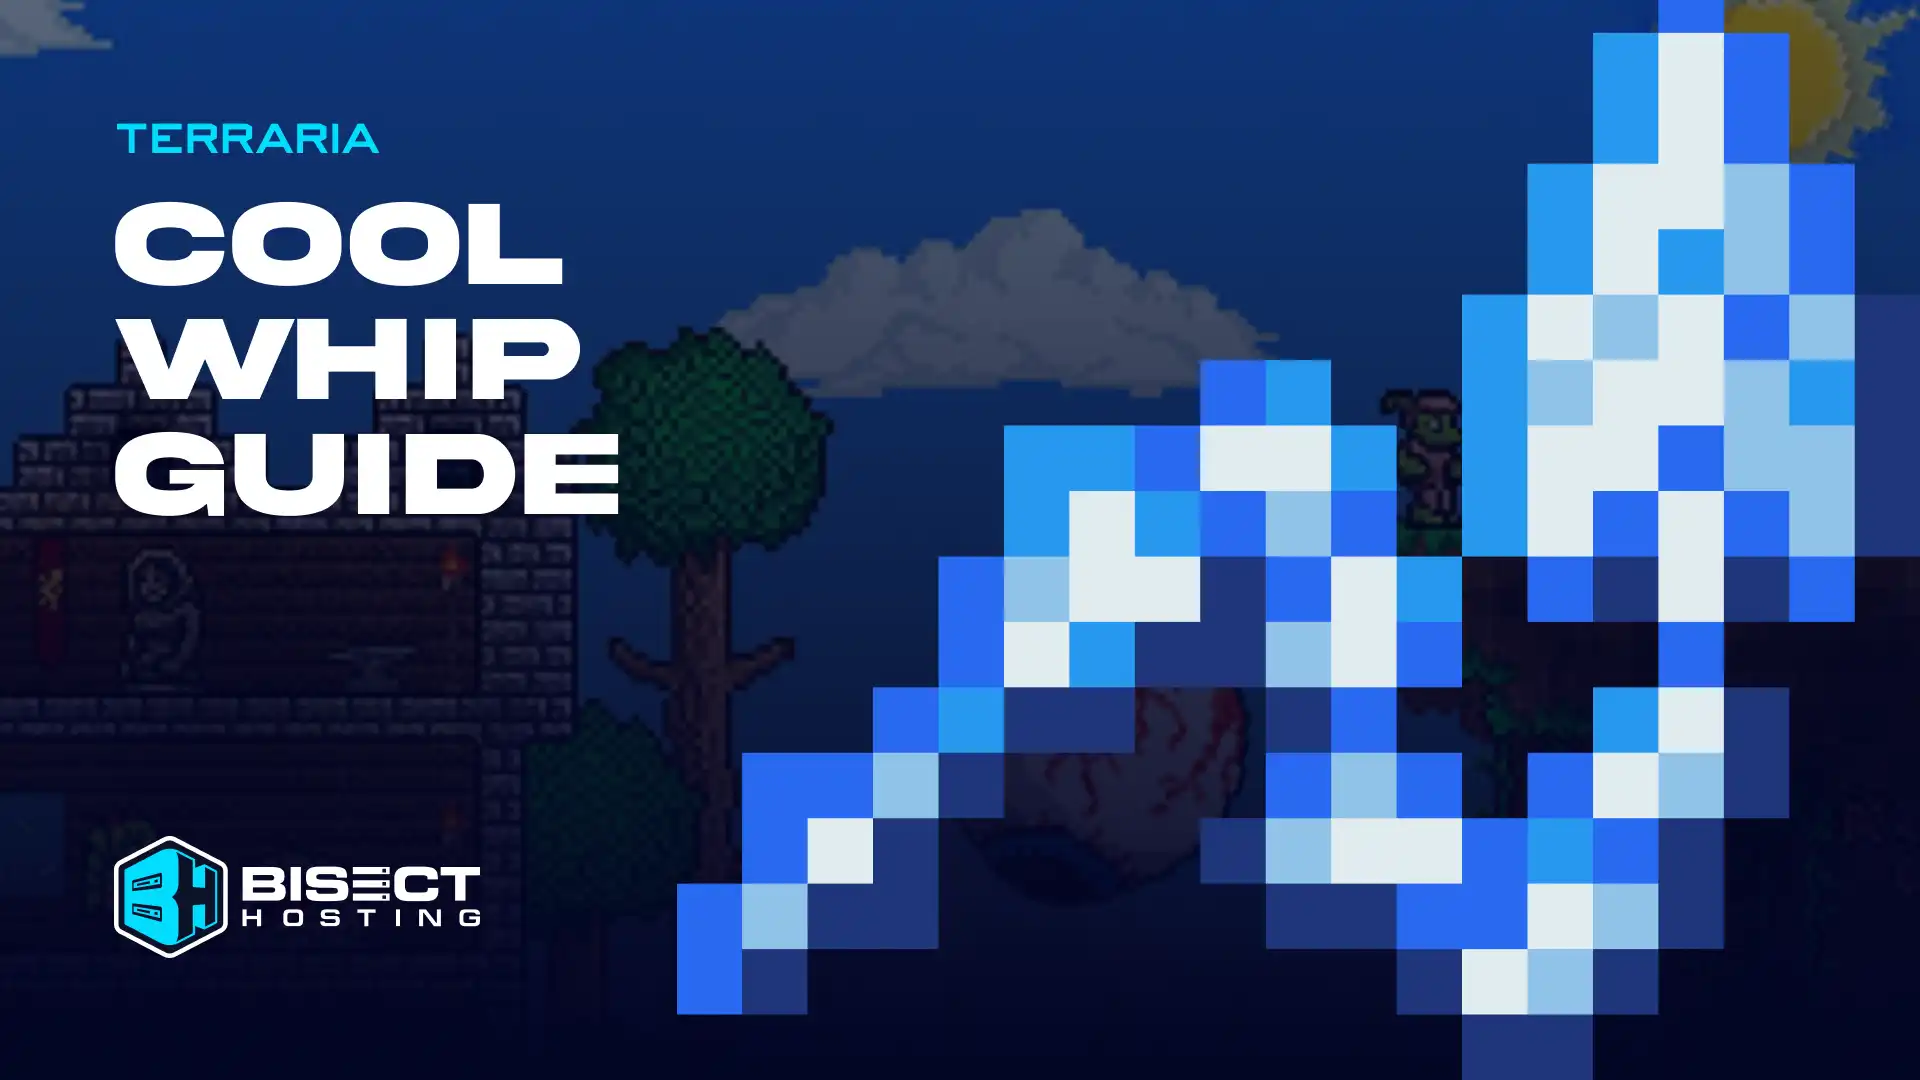 Terraria Cool Whip Guide: How to Get, Stats, Effects, & more